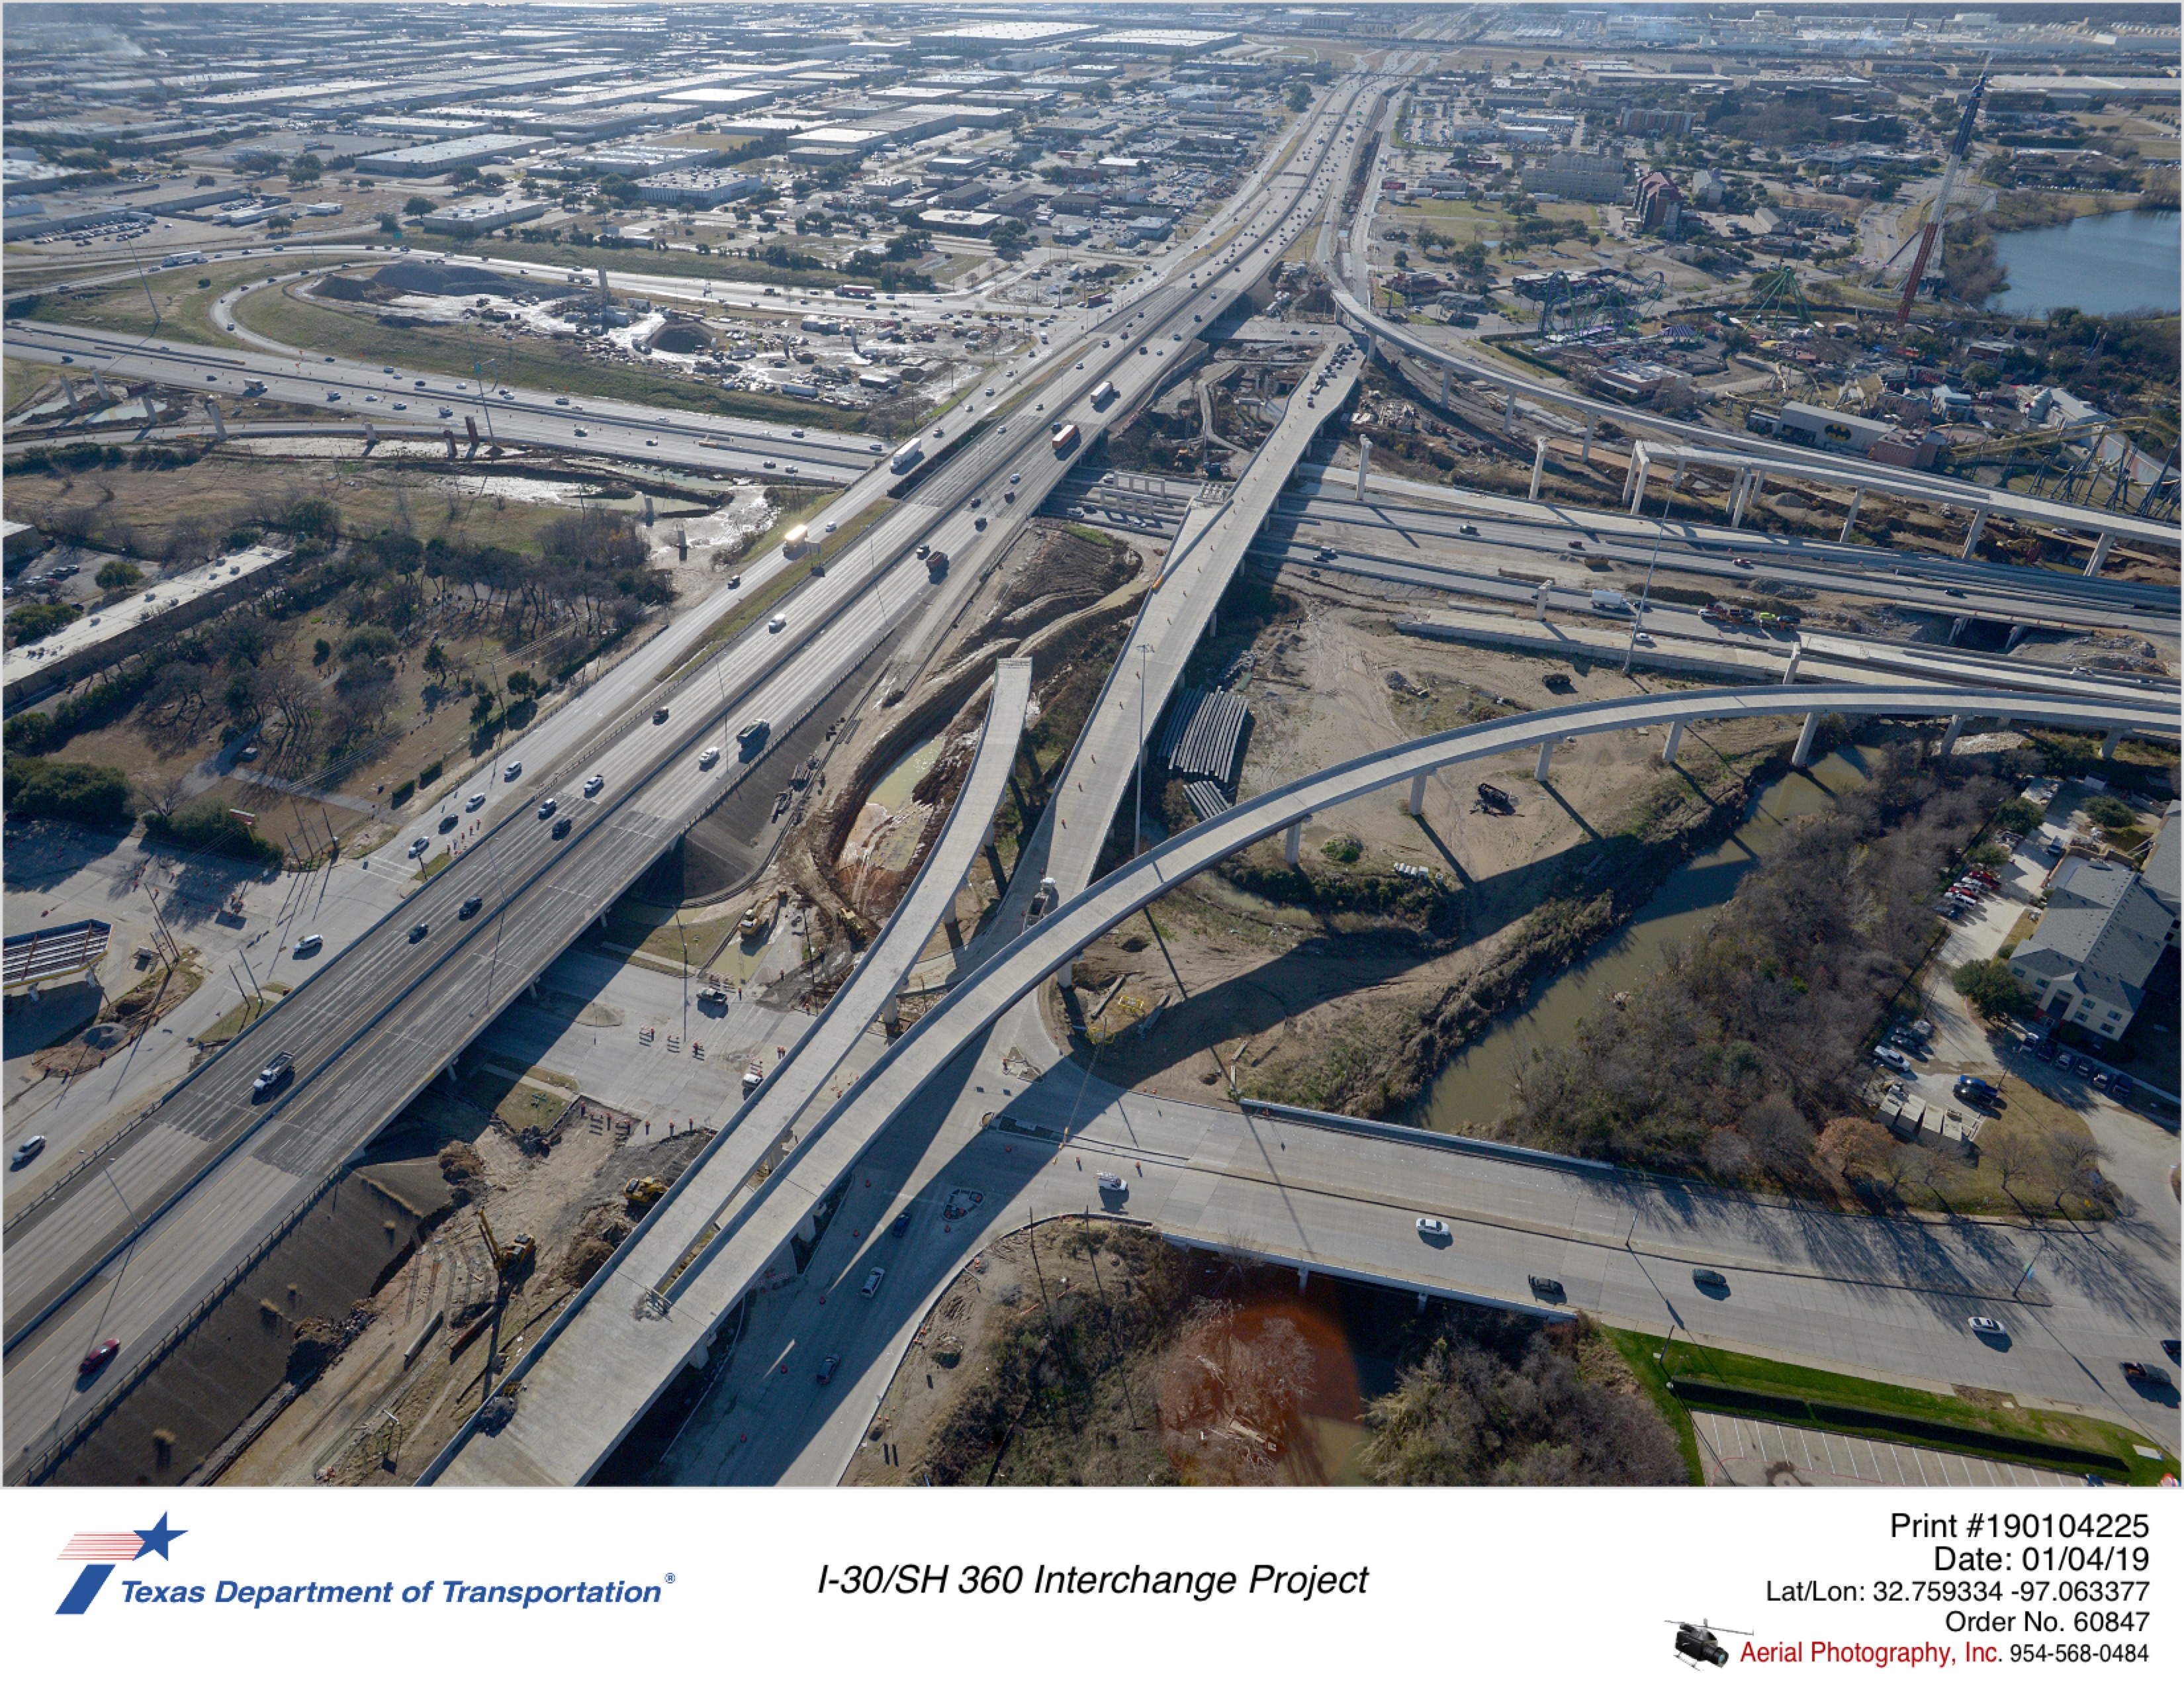 I-30/SH 360 interchange looking southeast with Lamar Blvd in foreground